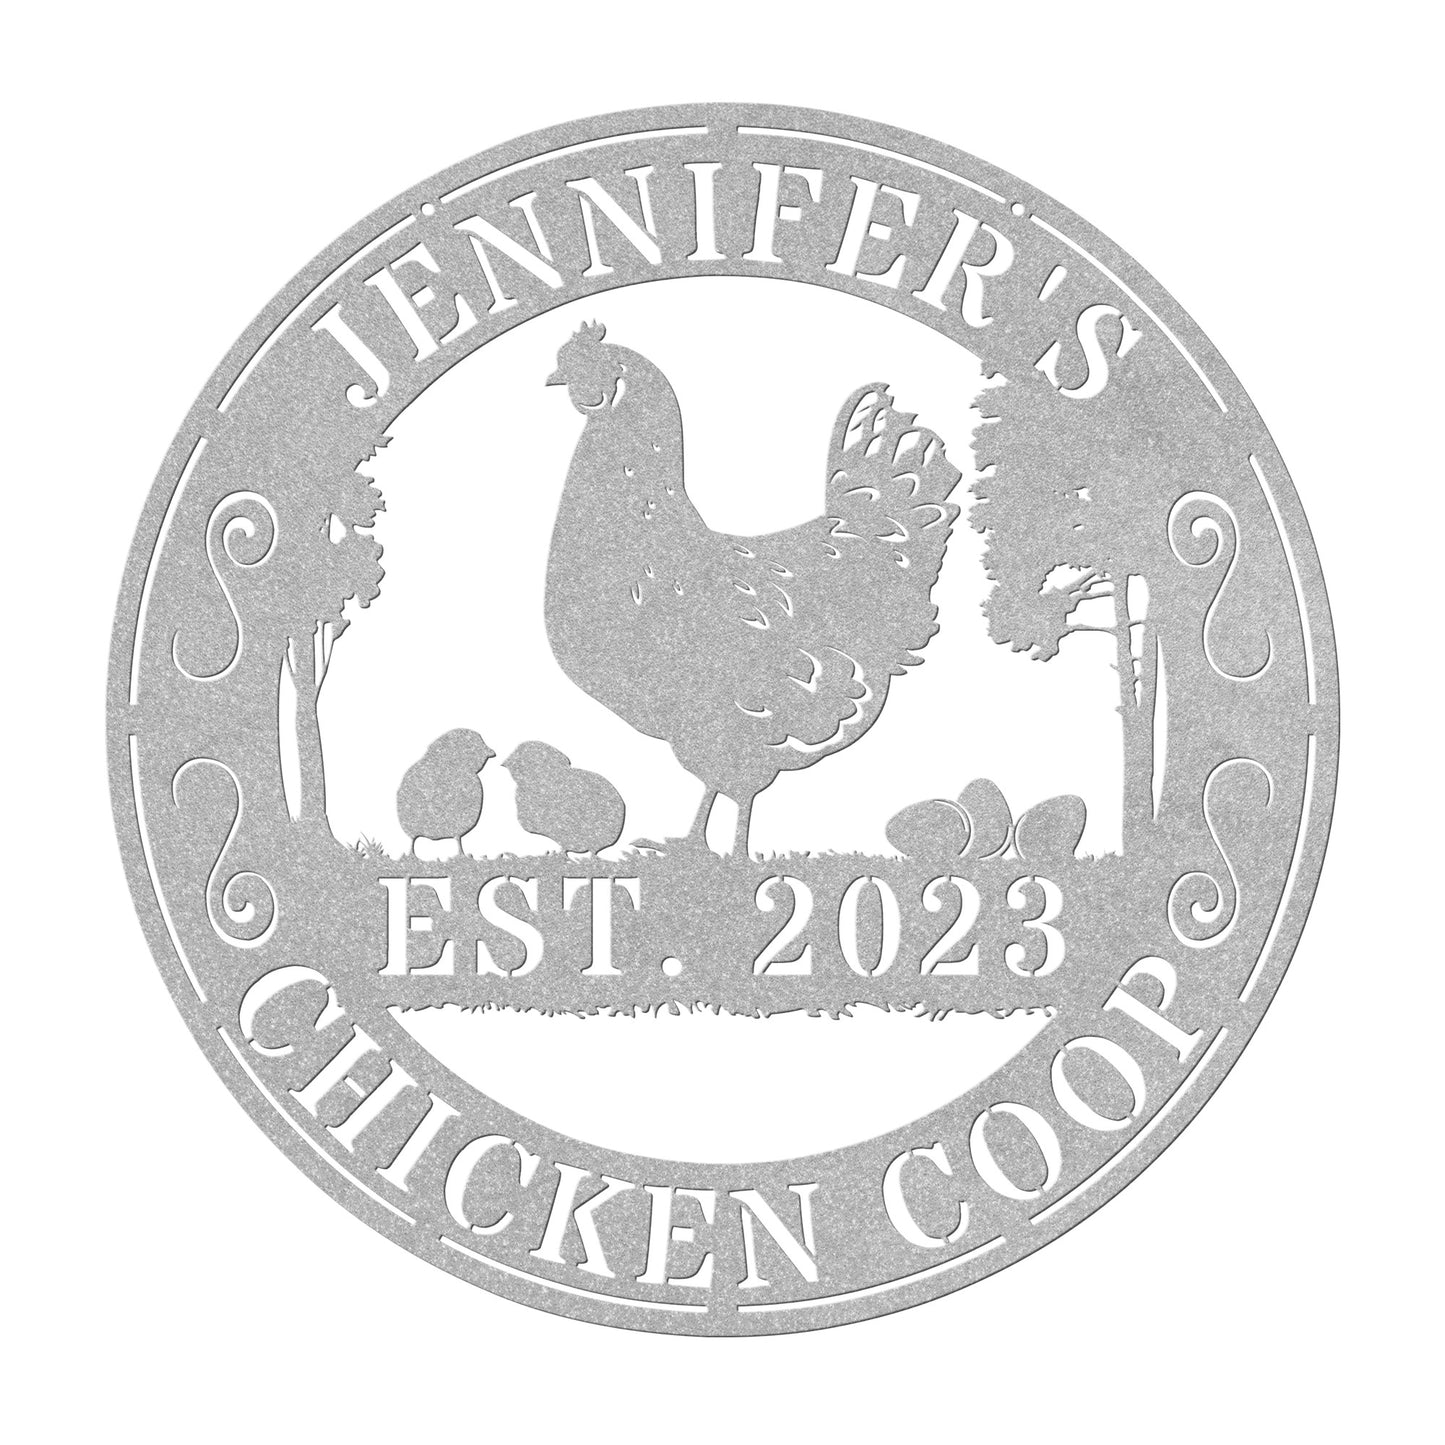 Wall Art Personalized Chicken Coop Sign, Hen House Coop Sign, Our Little Coop Sign Metal Sign, Metal Chicken Coop Sign, Custom Chicken Coop sign teelaunch